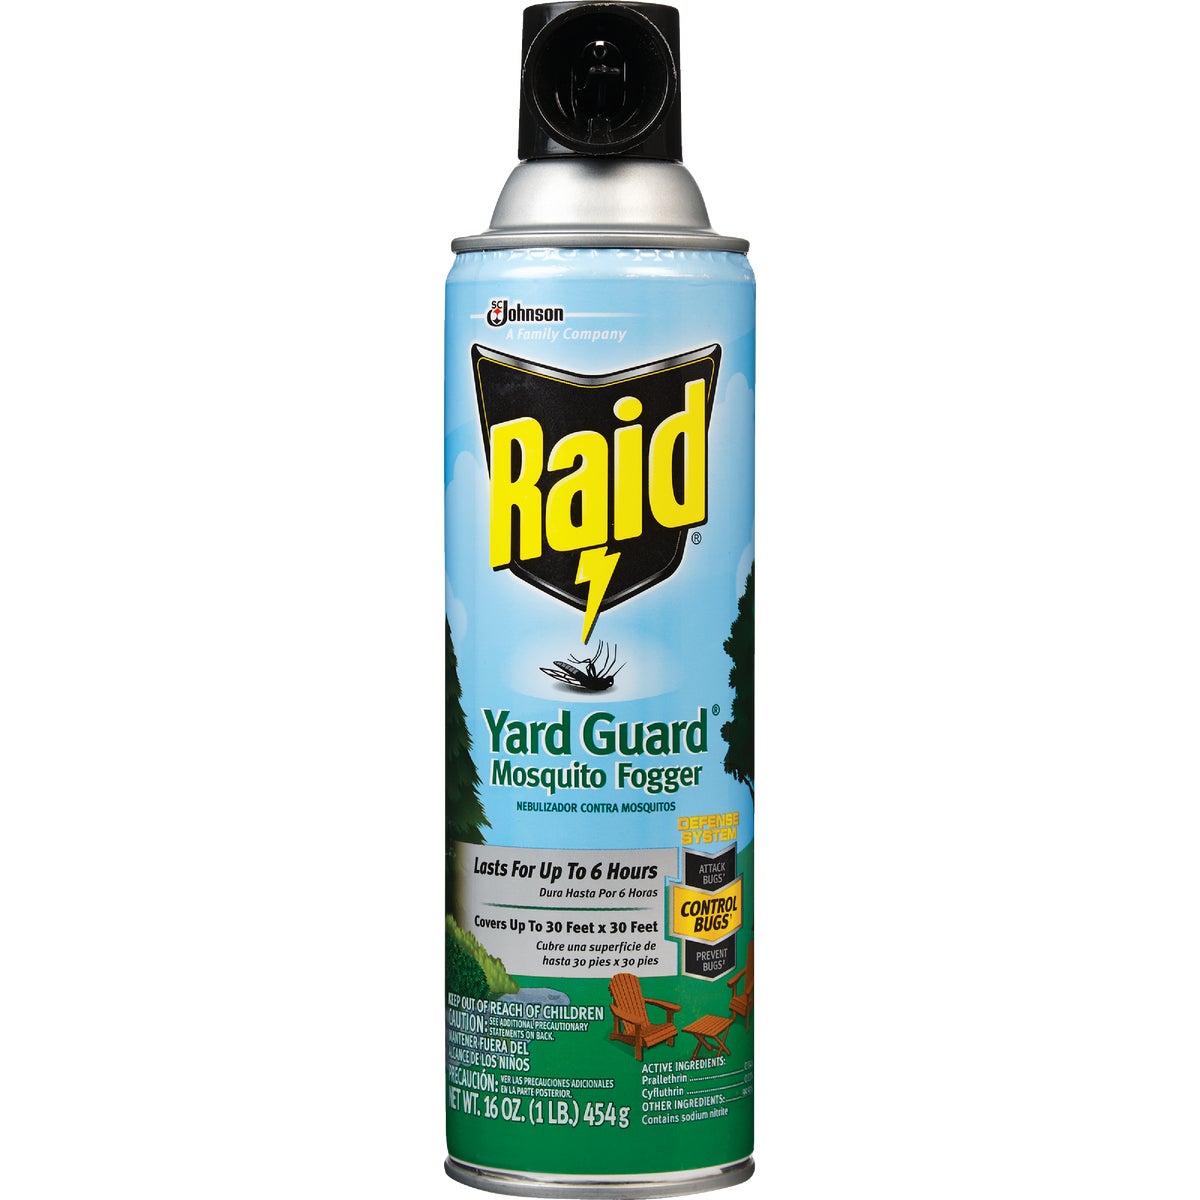 Item 756326, Raid Yard Guard mosquito outdoor fogger keeps bugs away up to 6 hours.